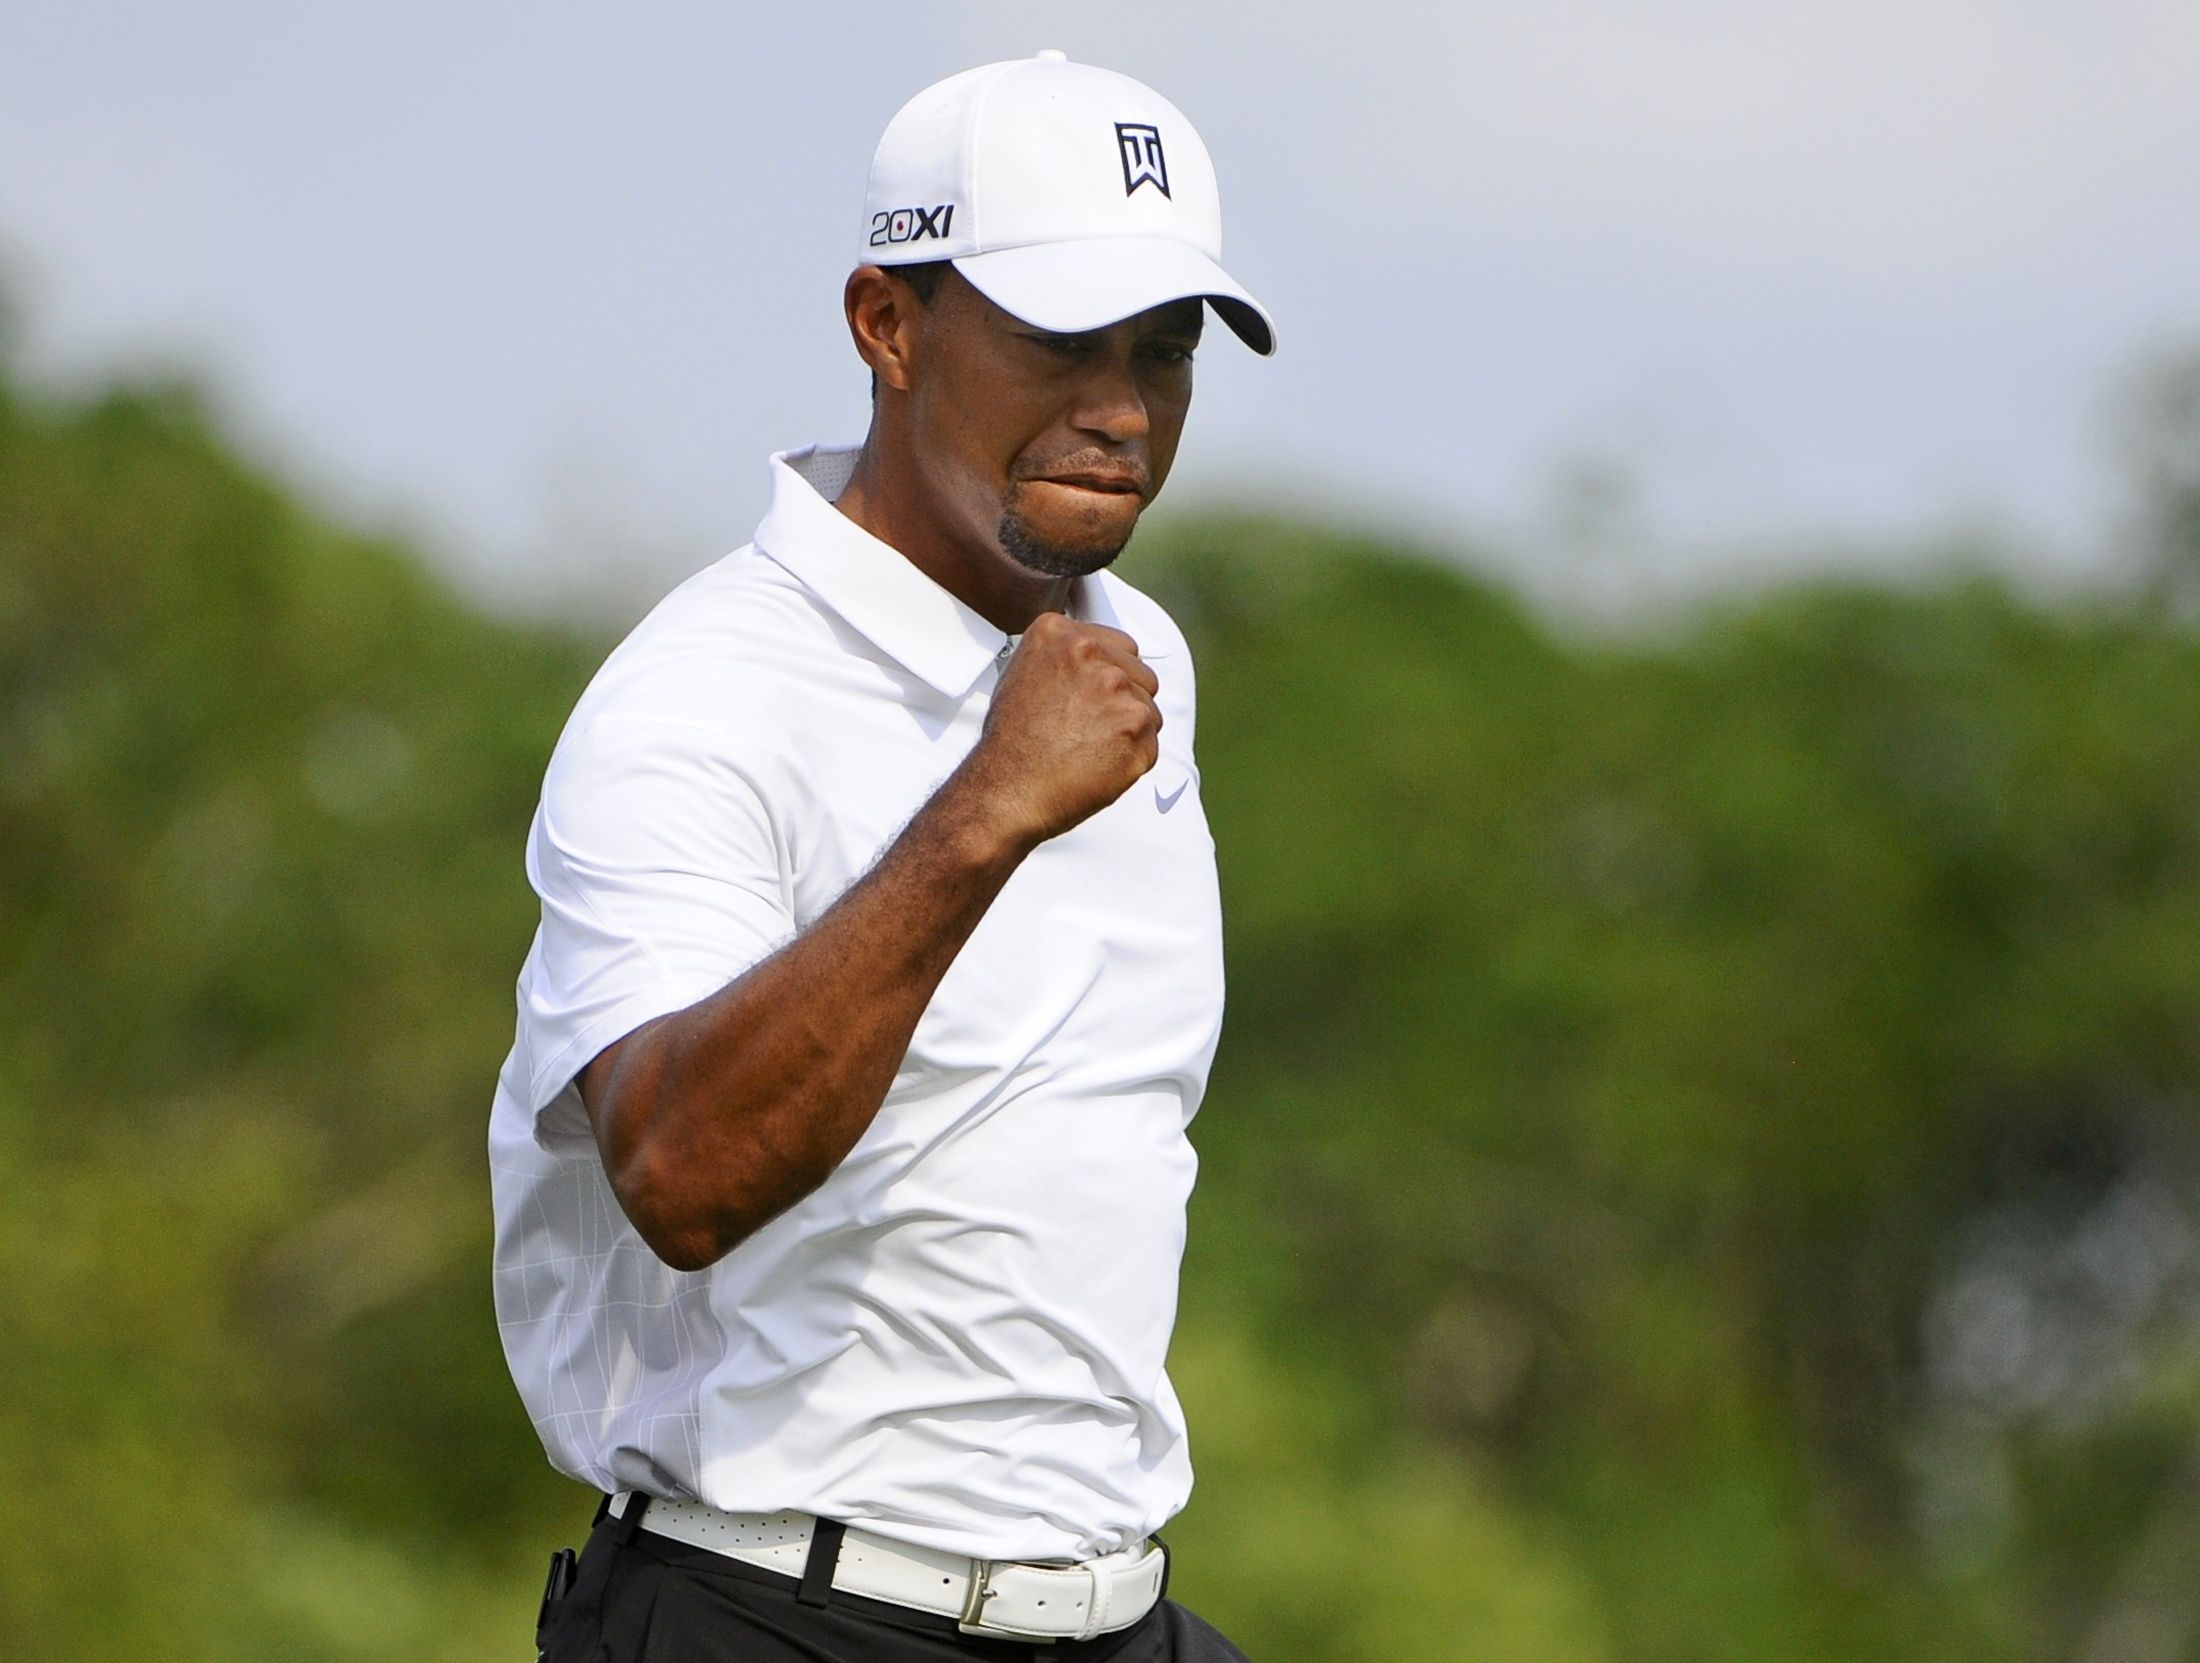 Tiger Woods At Arnold Palmer Invitational Where To Watch Live Online